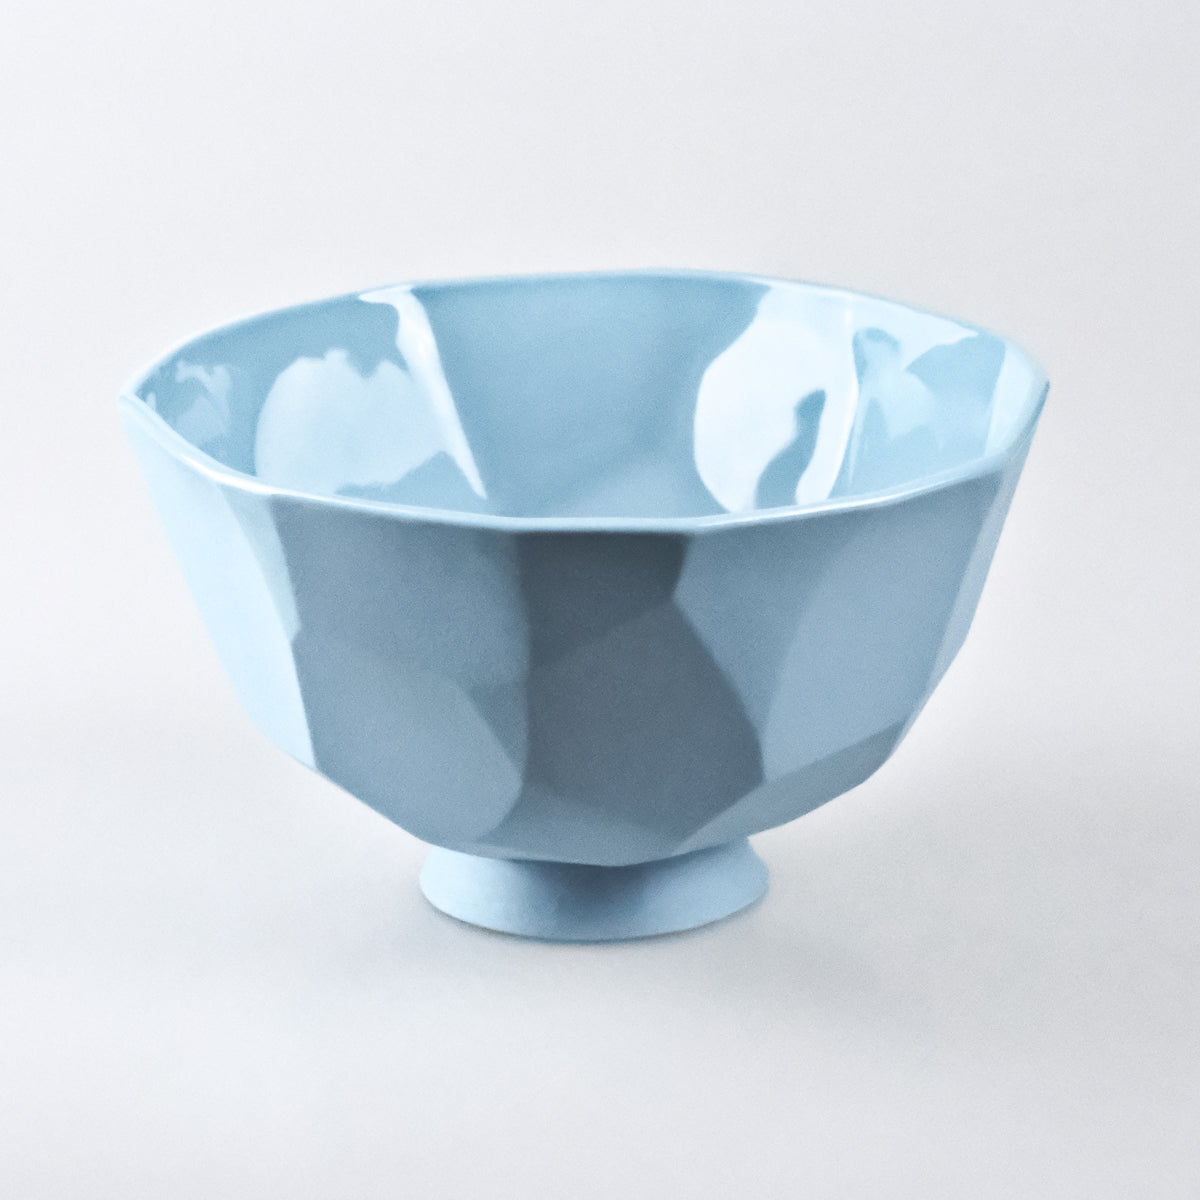 Polli footed bowl